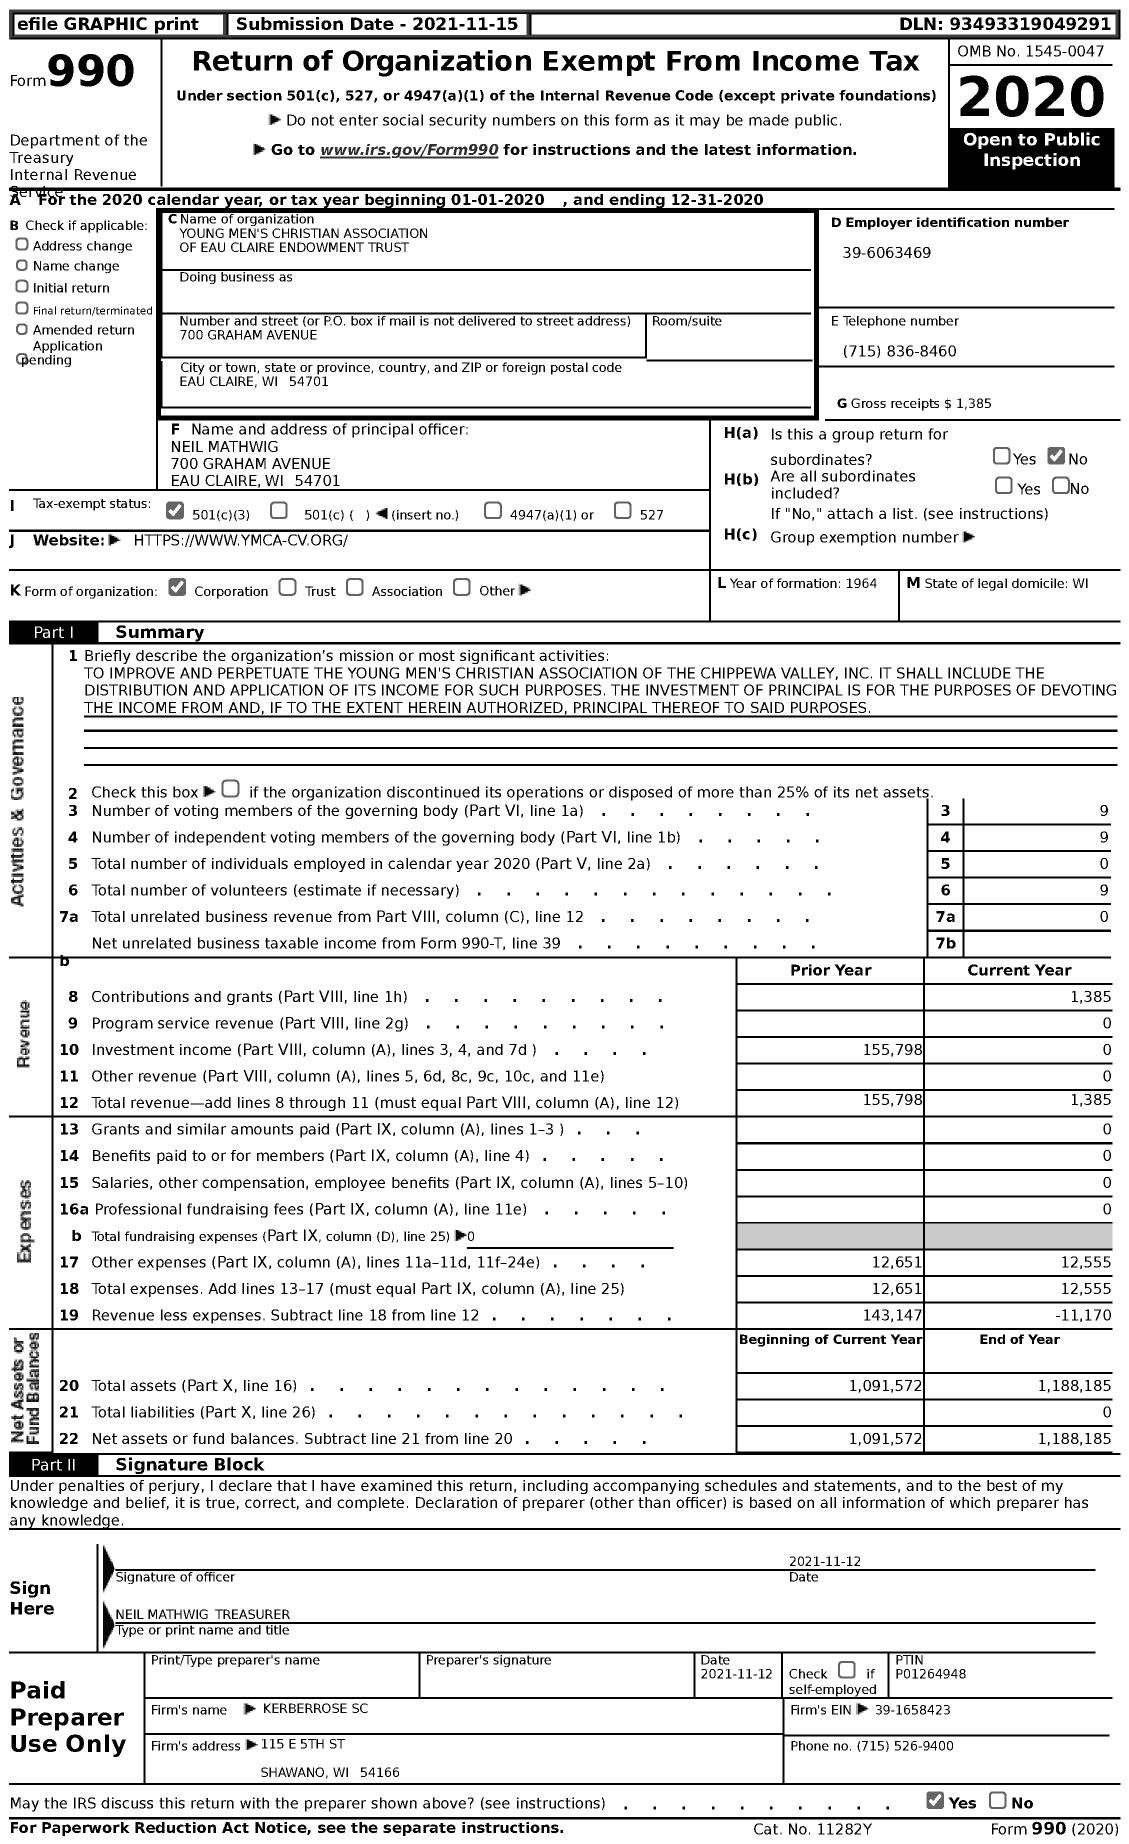 Image of first page of 2020 Form 990 for Young Men's Christian Association of Eau Claire Endowment Trust